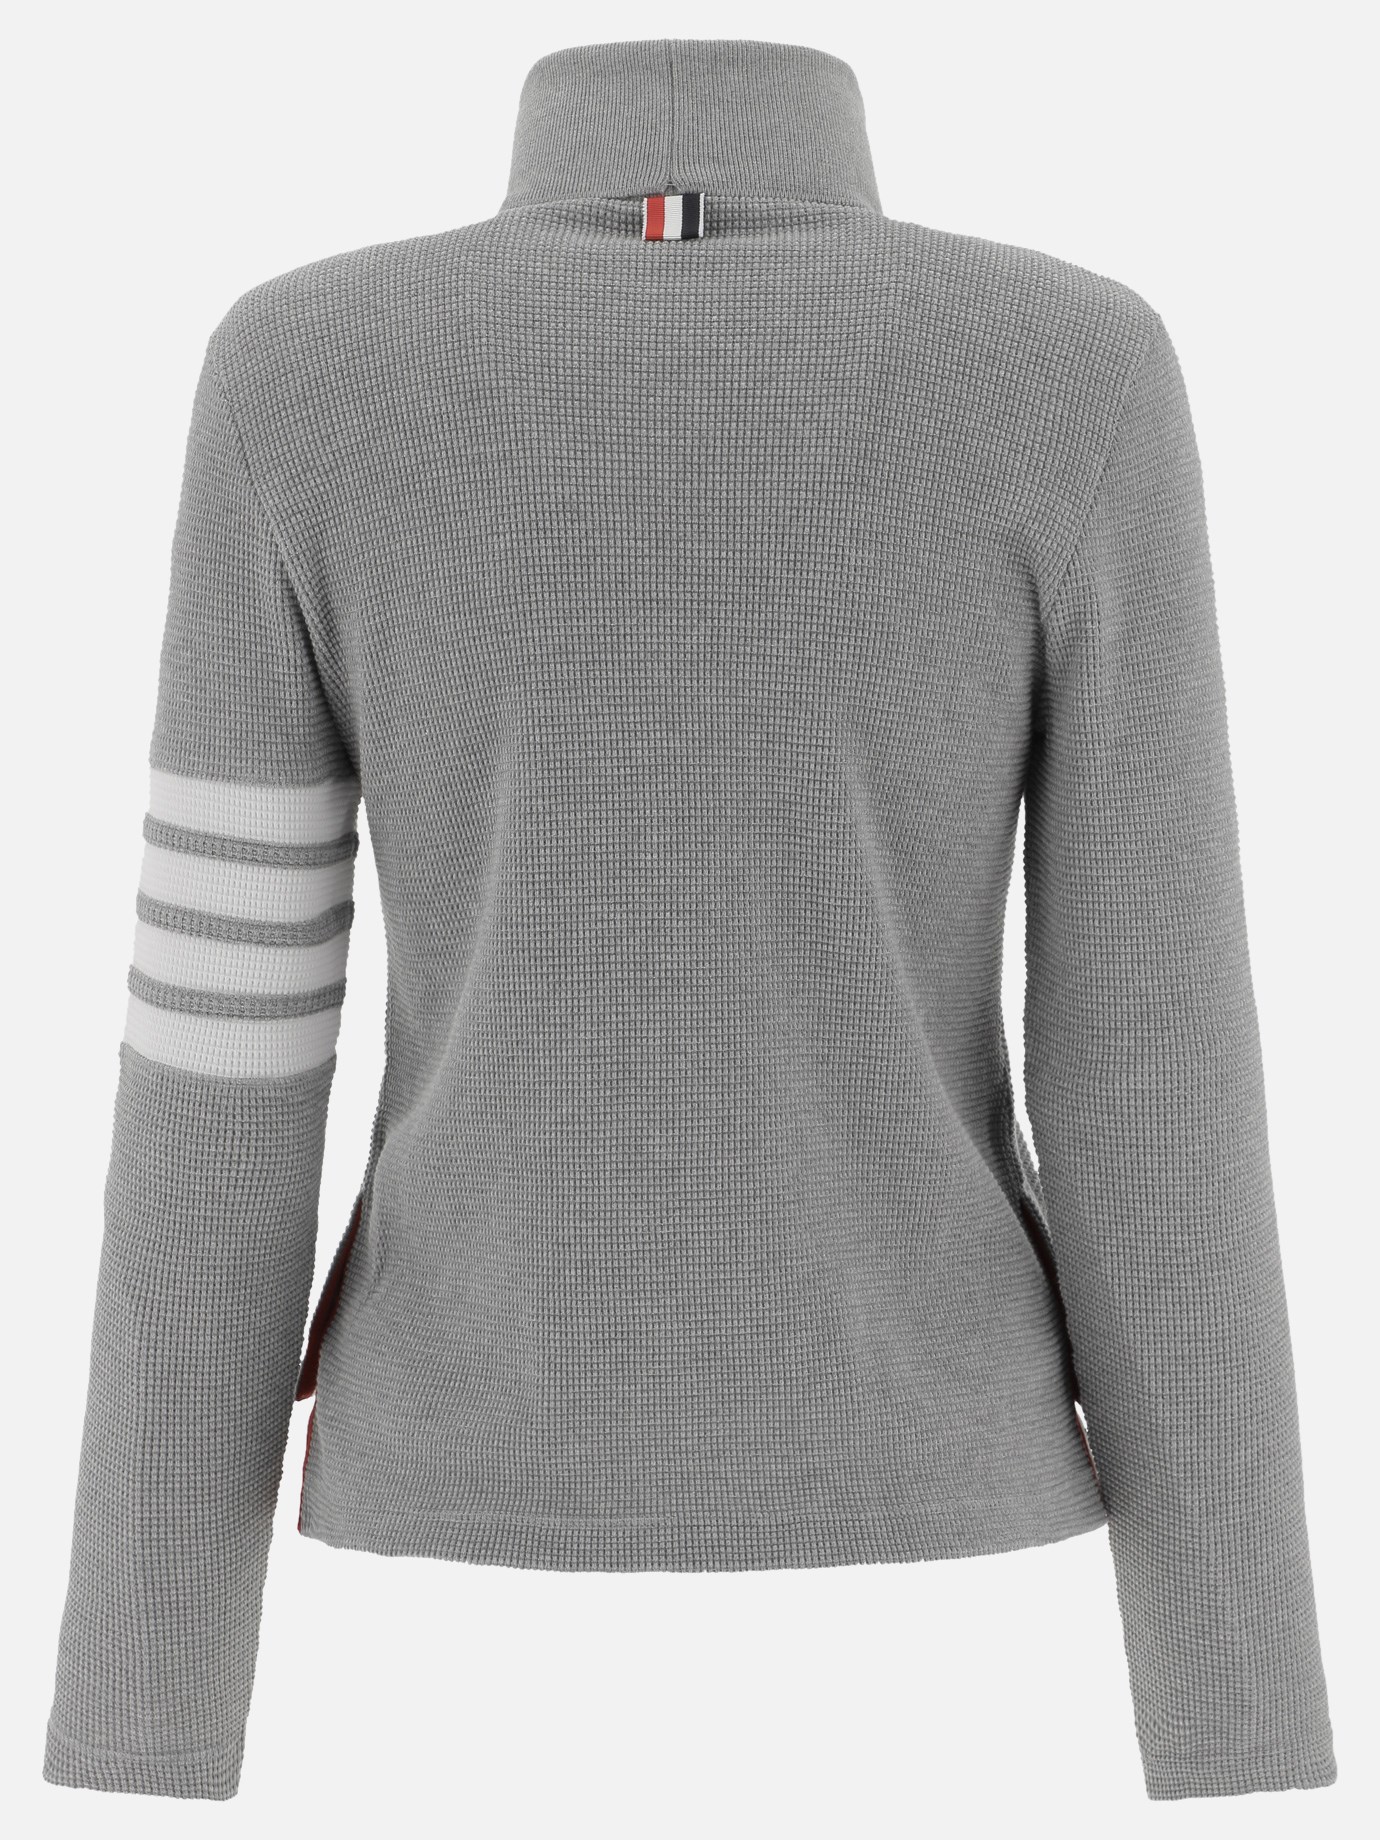  4-bar  turtleneck sweater by Thom Browne